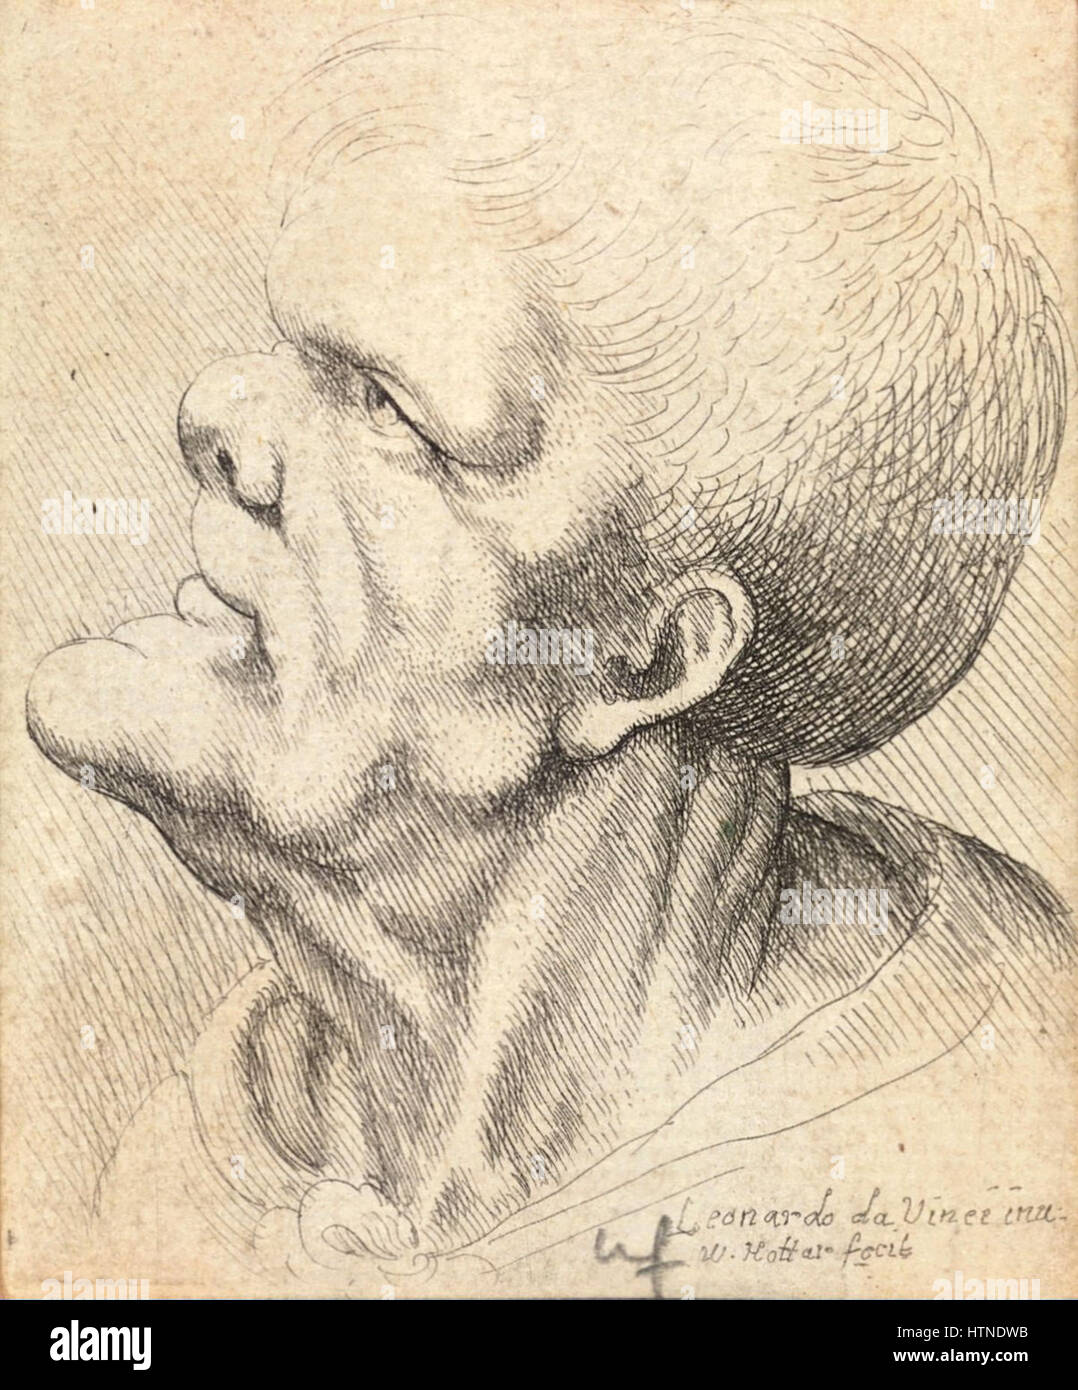 Wenceslas Hollar - Man with snub nose and flattened chin Stock Photo